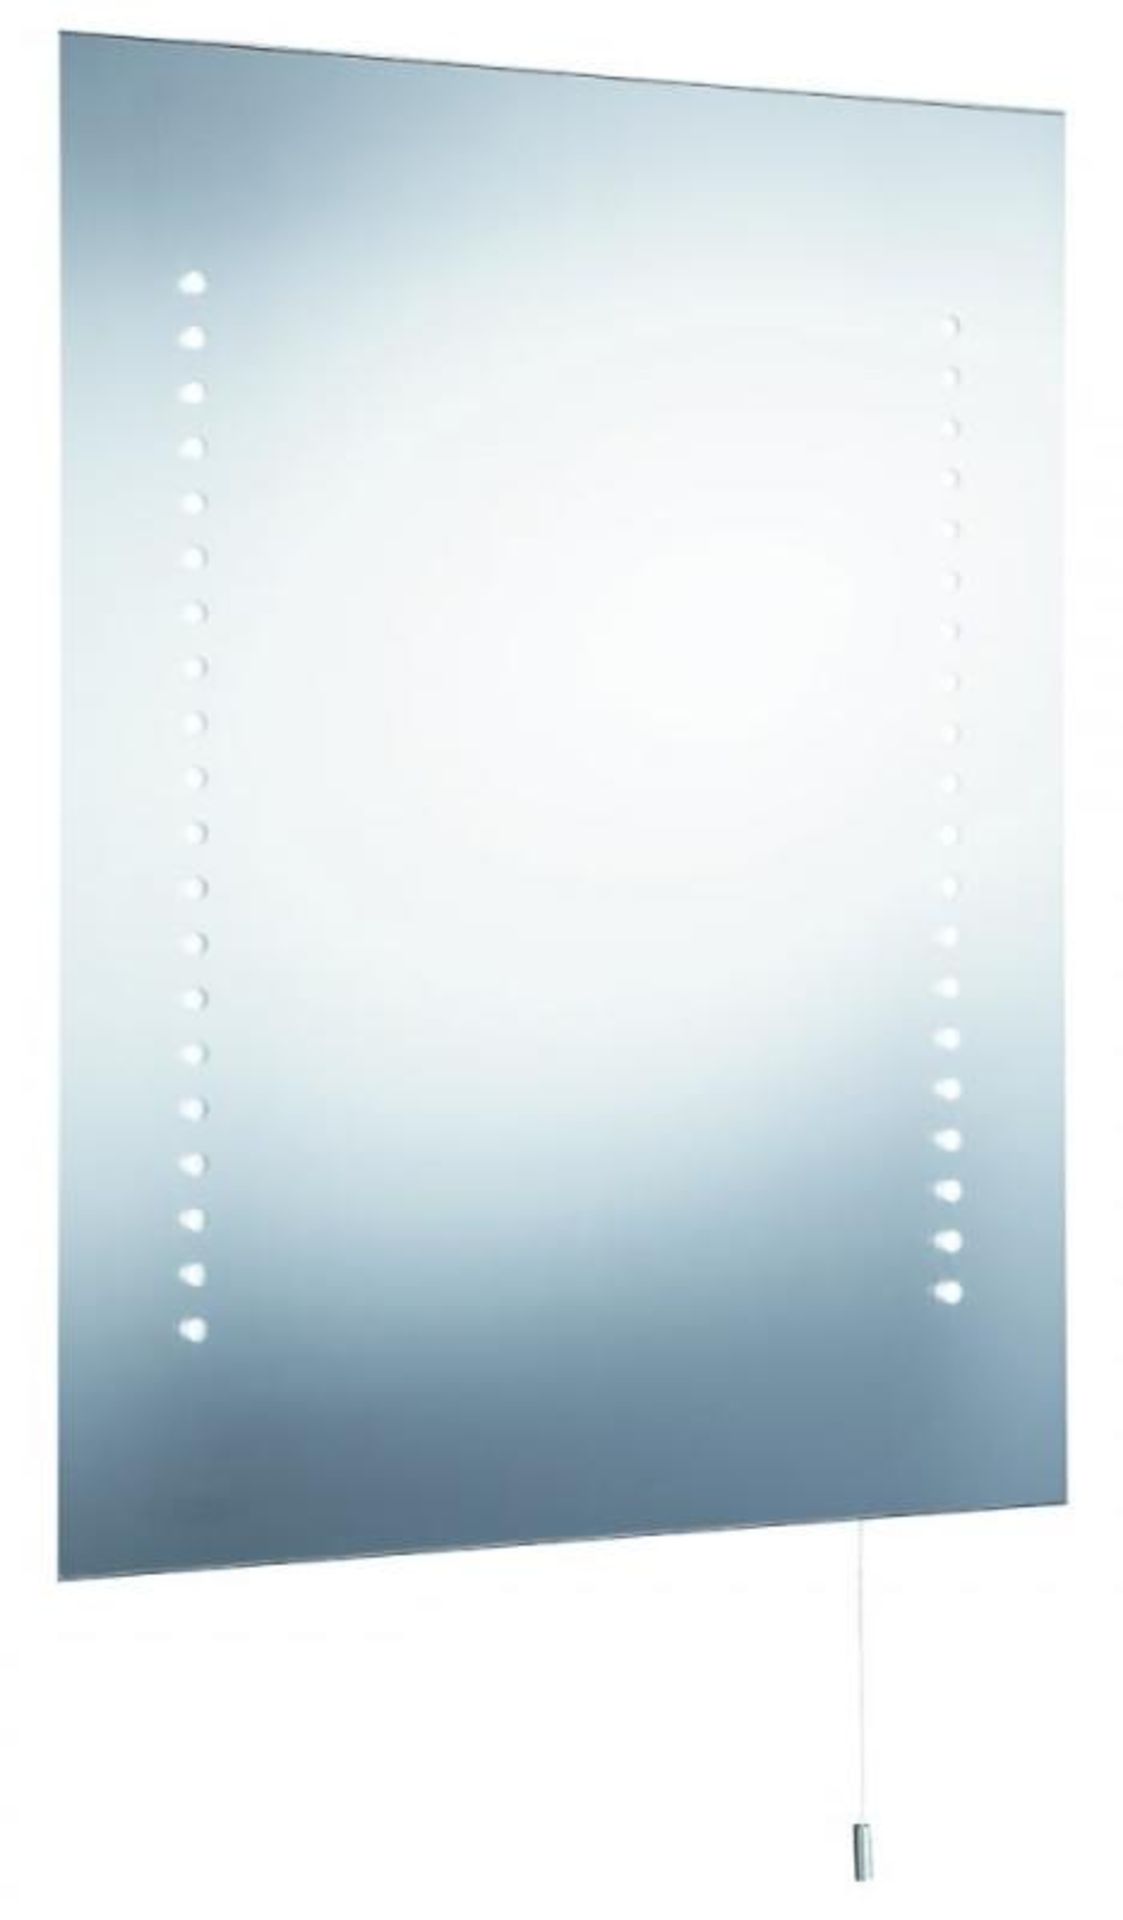 1 x Bathroom Light Led Mirror Battery Operated - New Boxed Stock - CL323 - Prodouct Code 9305 - Ref